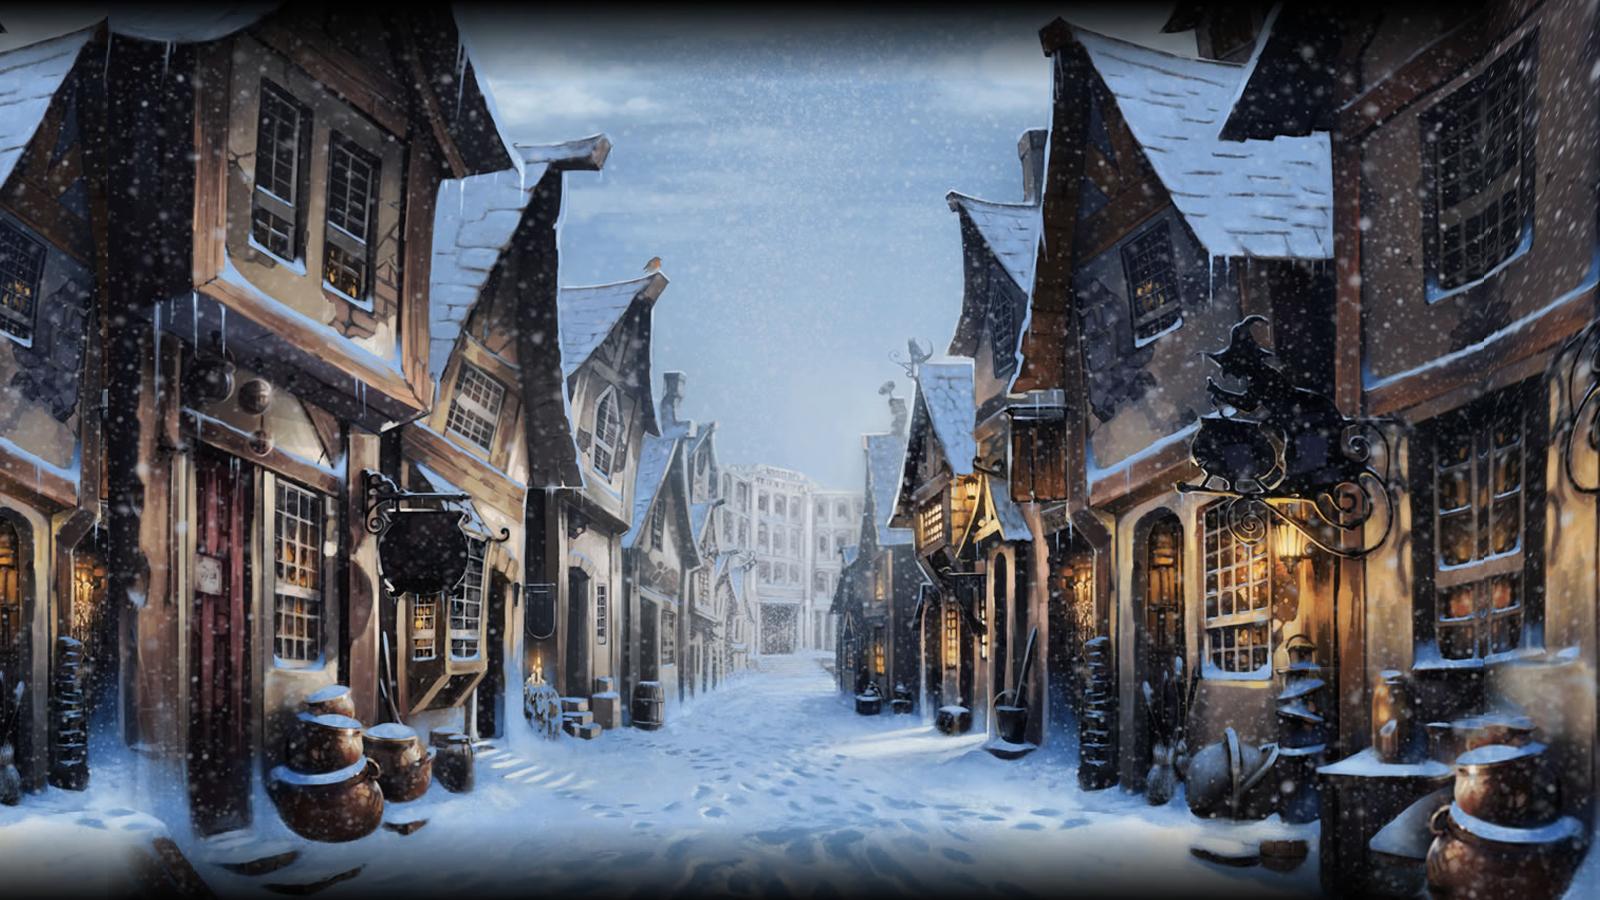 Diagon Alley Wallpaper. Diagon Alley Harry Potter Wallpaper, Peaceful Valley Wallpaper and Lily Valley Wallpaper